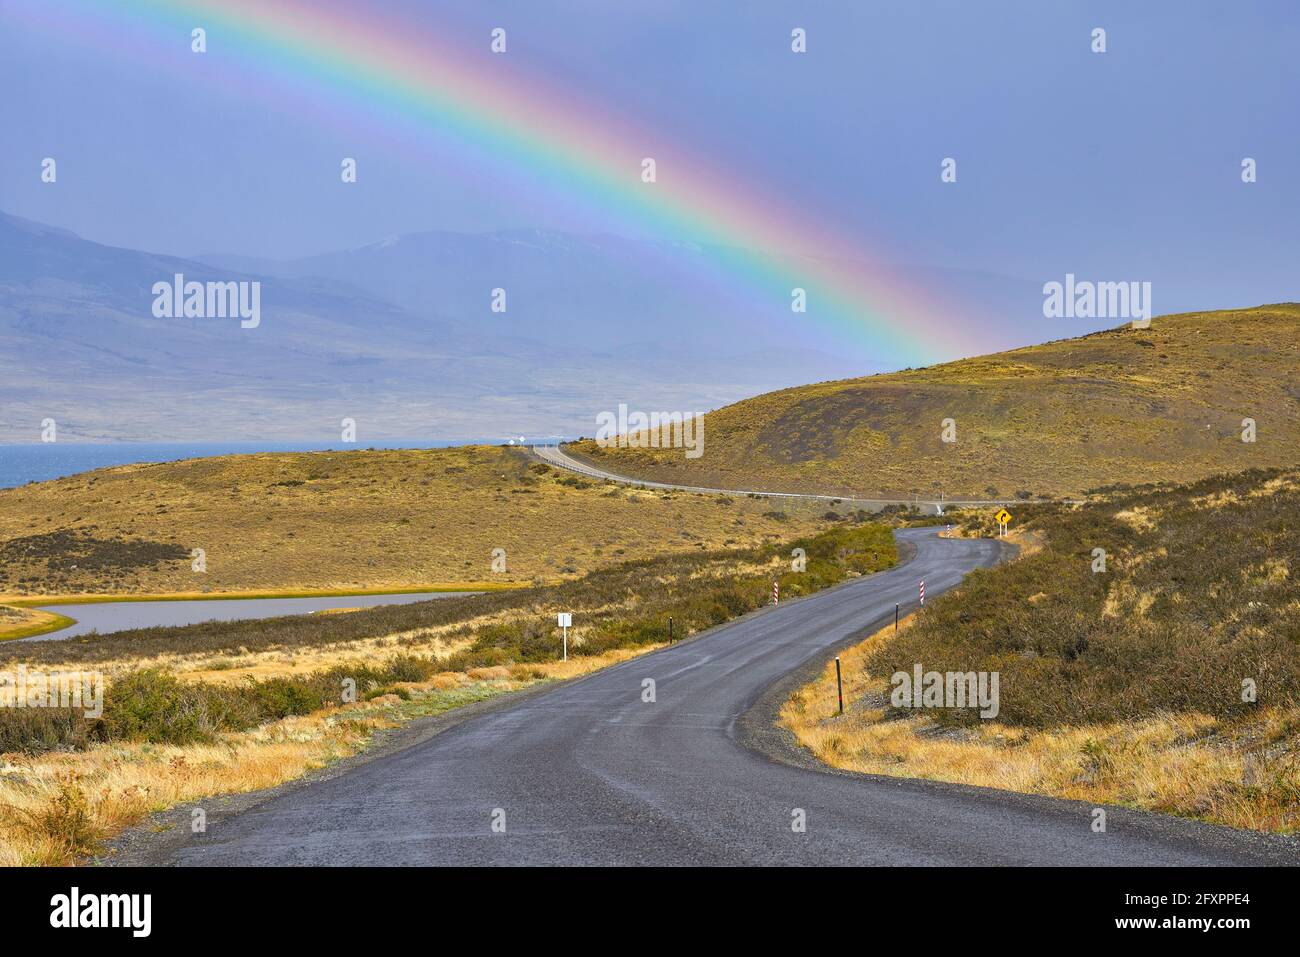 Rainbow, Torres del Paine National Park, Ultima Esperanza Province, Magallanes and Chilean Antactica Region, Patagonia, Chile, South America Stock Photo